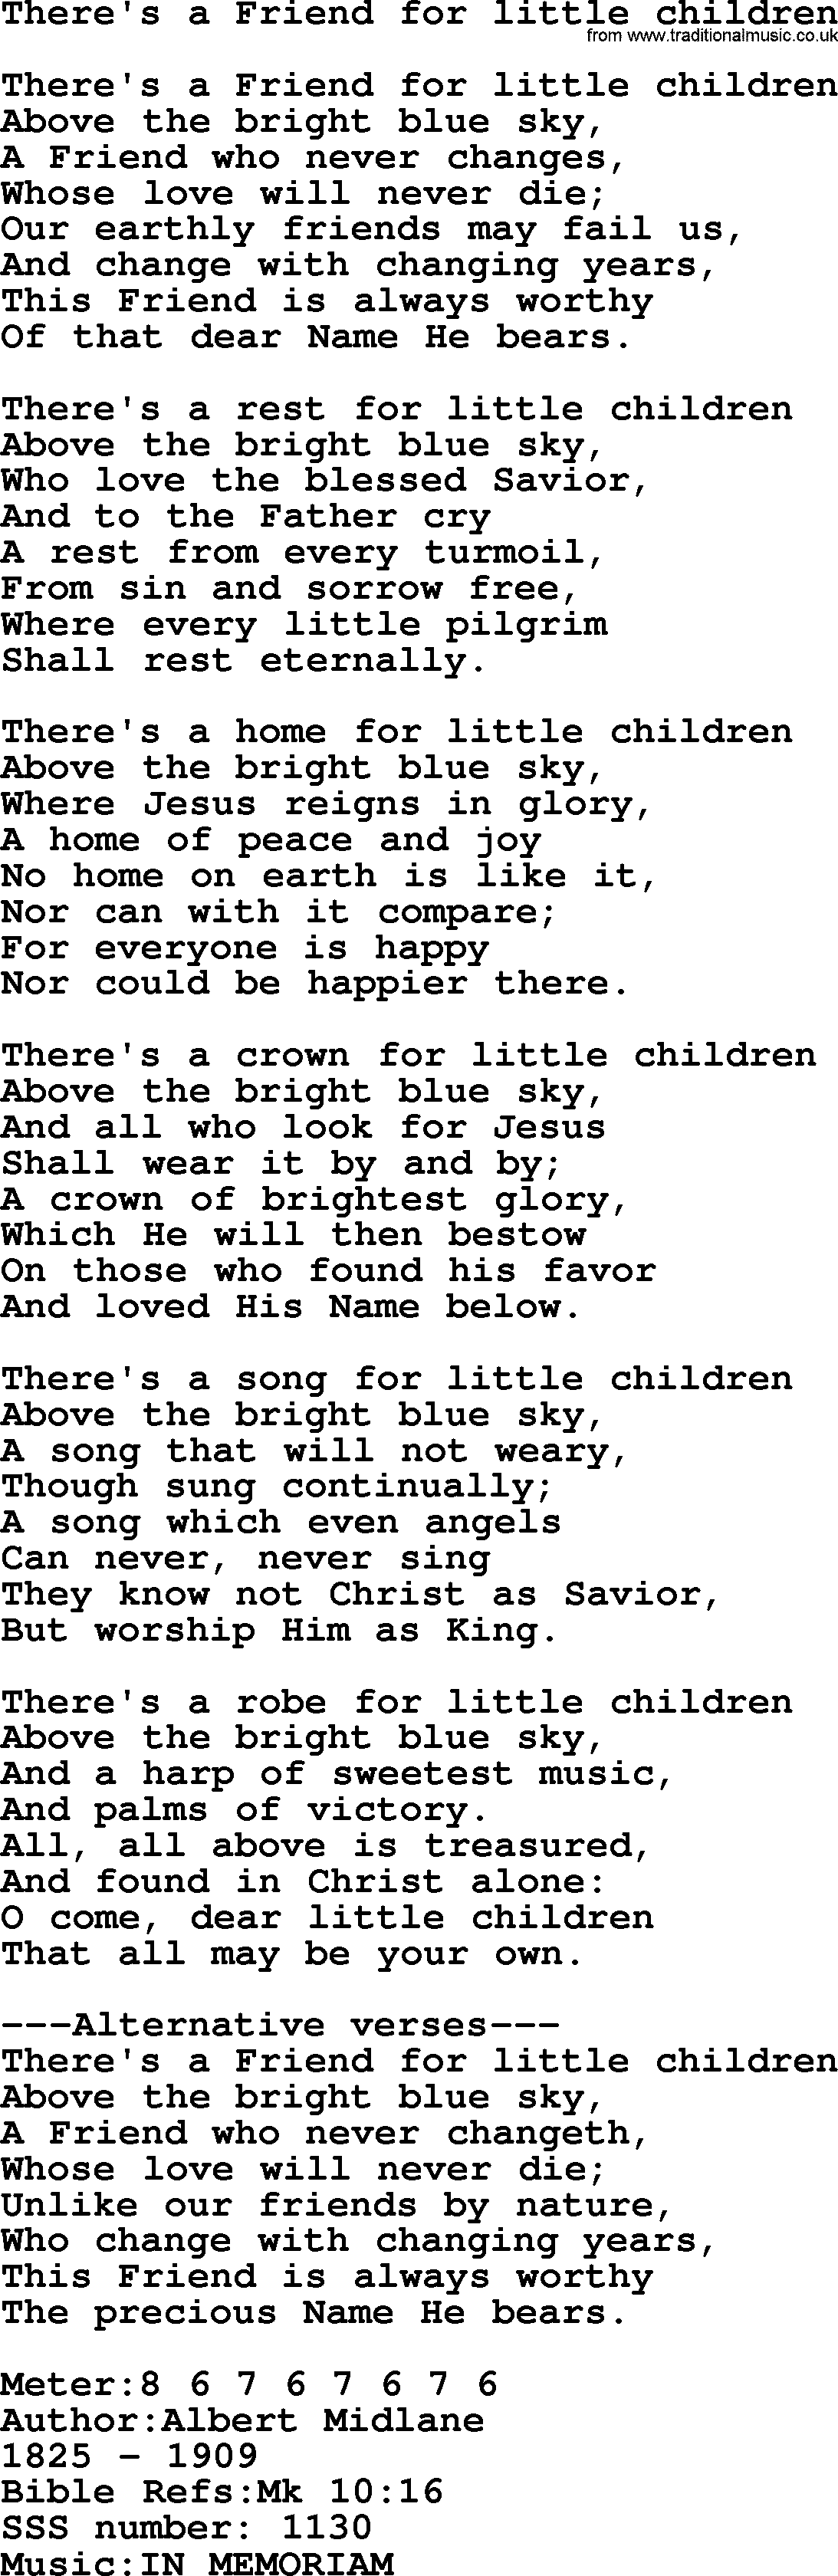 Sacred Songs and Solos complete, 1200 Hymns, title: There's A Friend For Little Children, lyrics and PDF